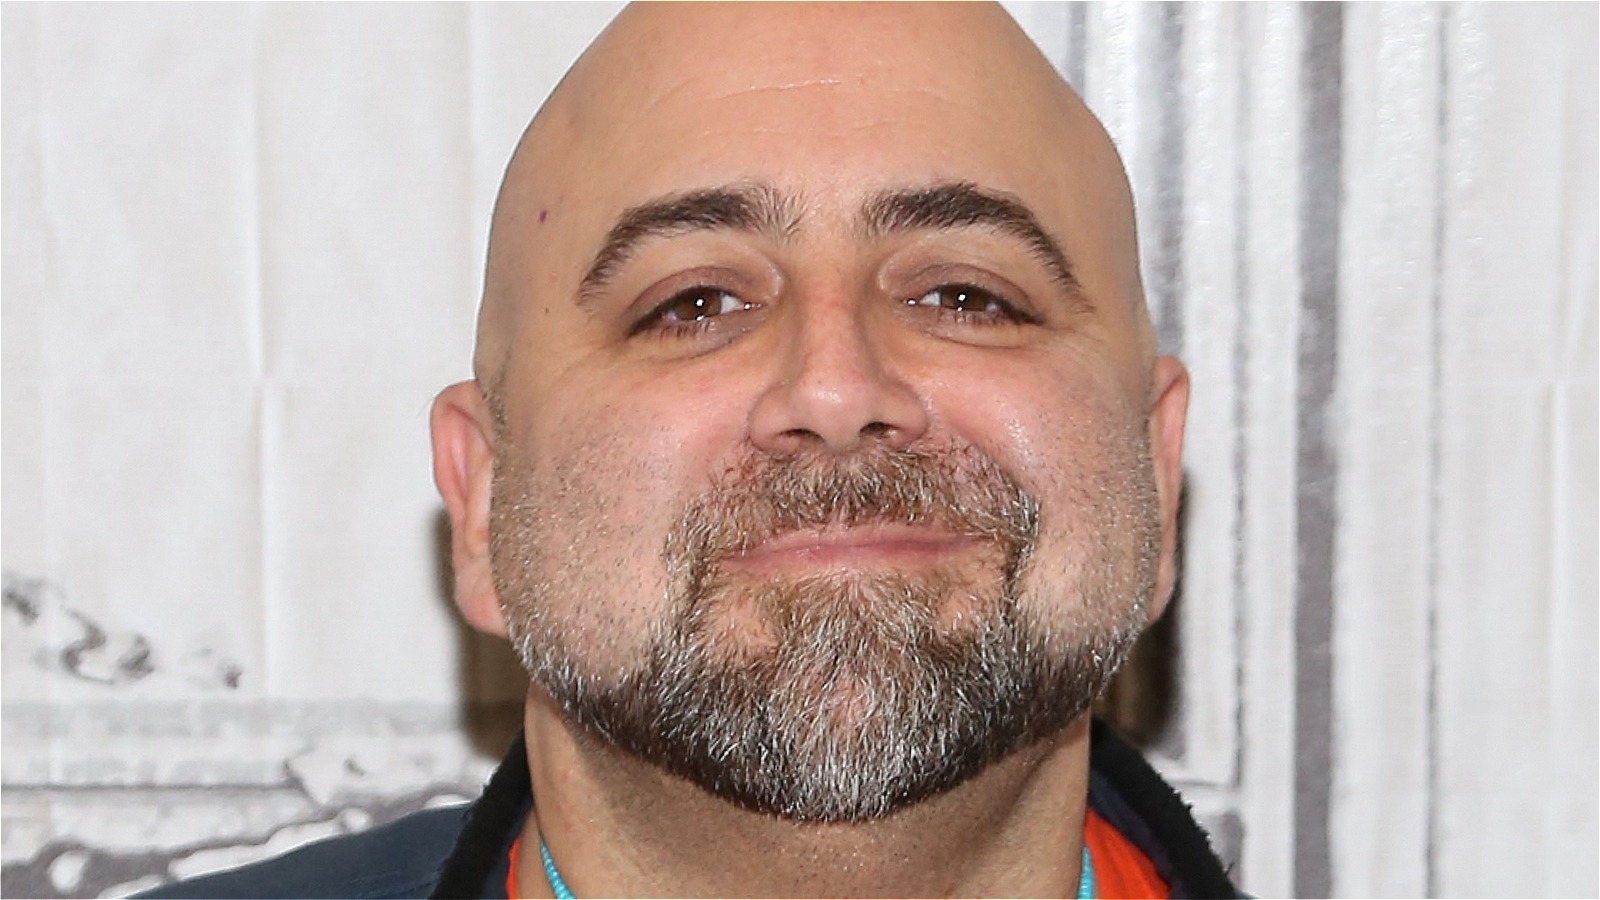 Put Duff in your pantry: Duff Goldman puts name on baking products